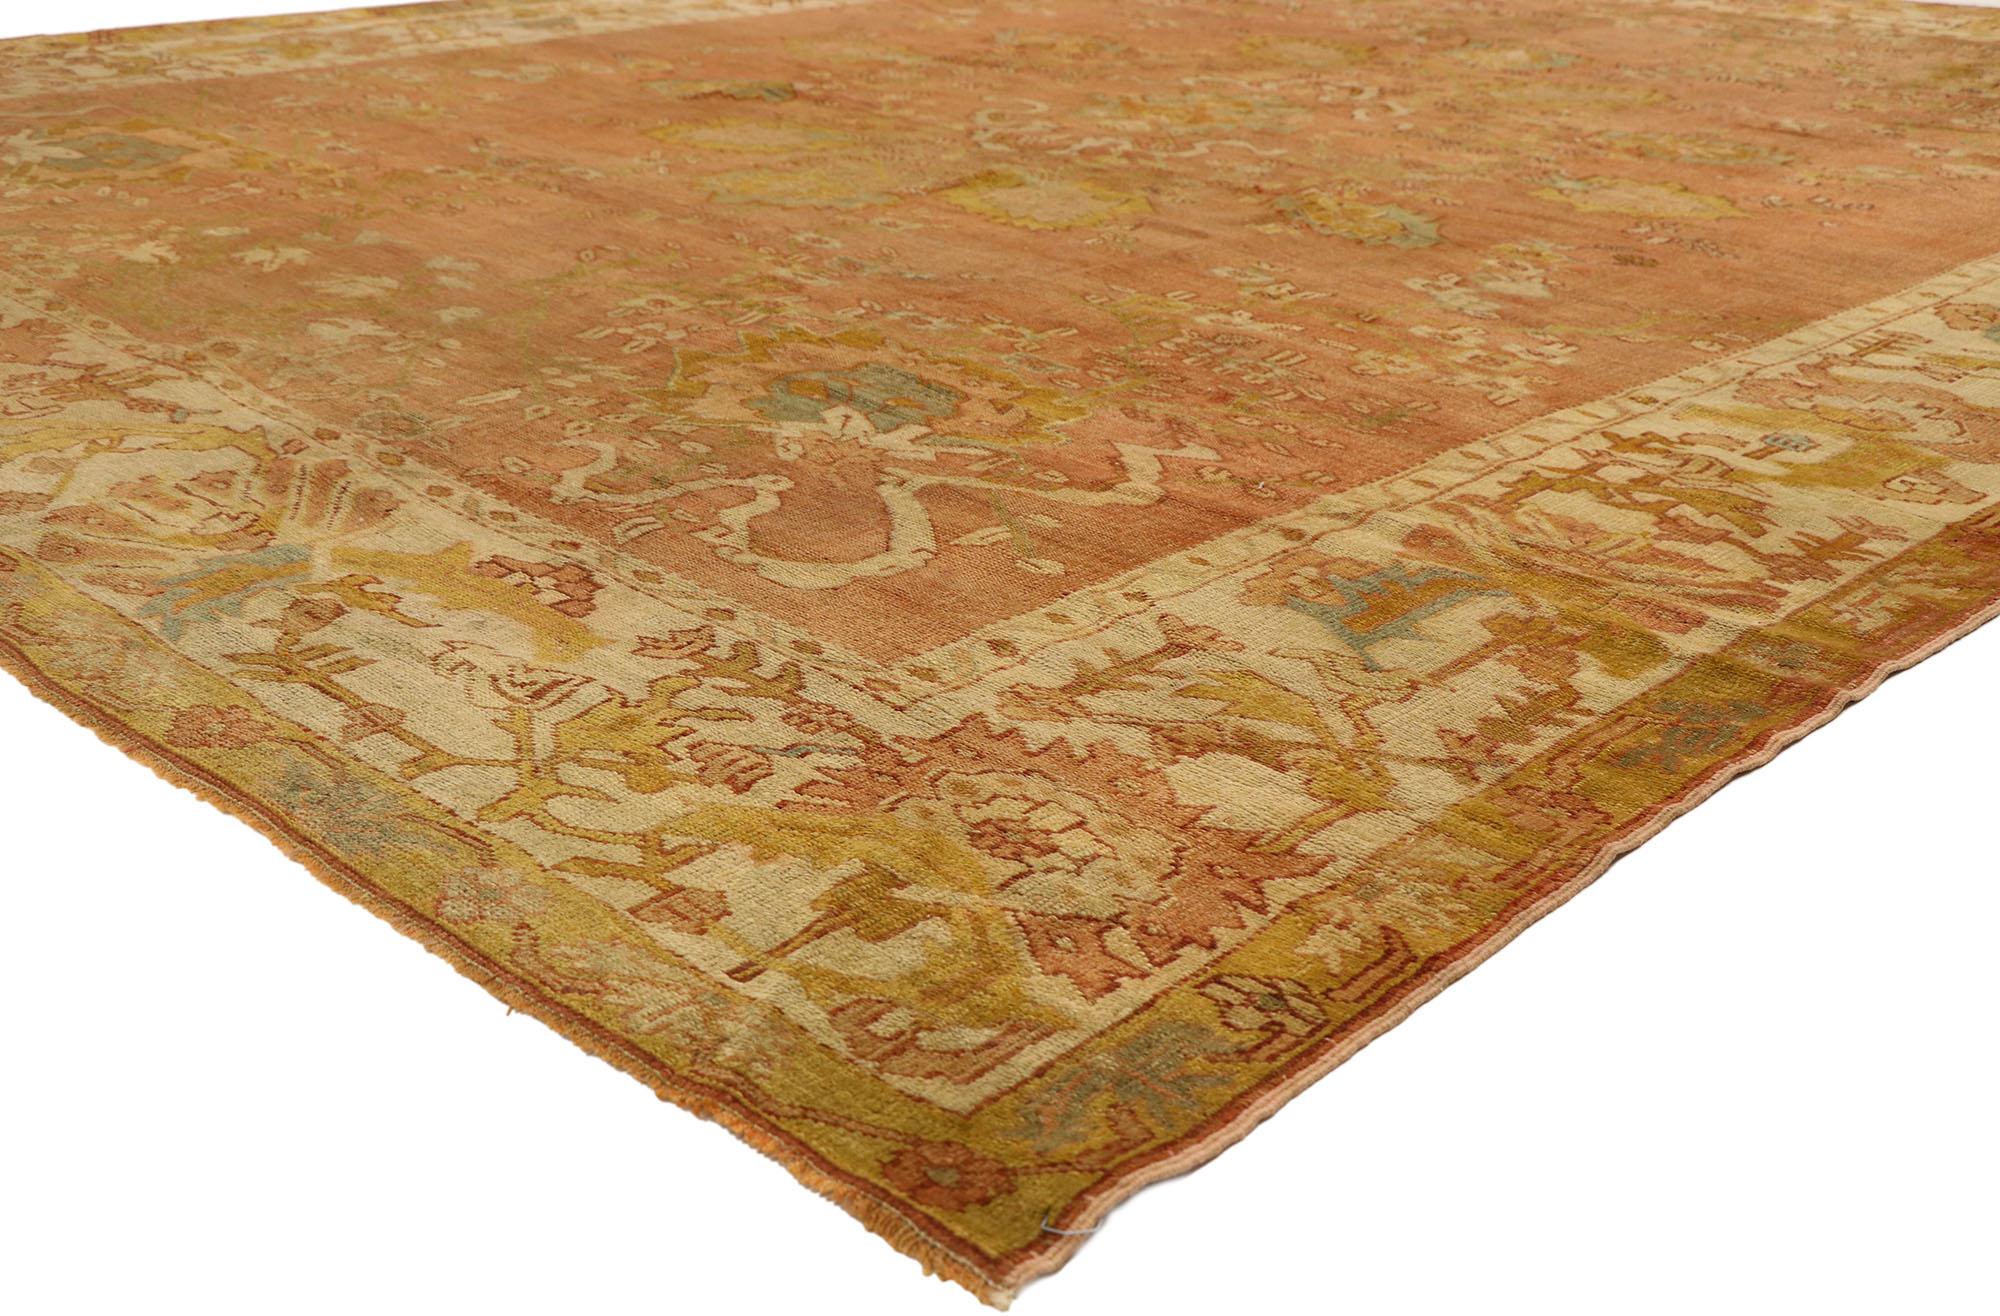 51231, distressed antique Turkish Oushak Area rug with rustic neoclassical style 10 x 12'05. Showcasing a timeless design and beguiling beauty, this hand knotted wool antique Turkish Oushak rug imparts a sense of warmth and welcomed informality. It